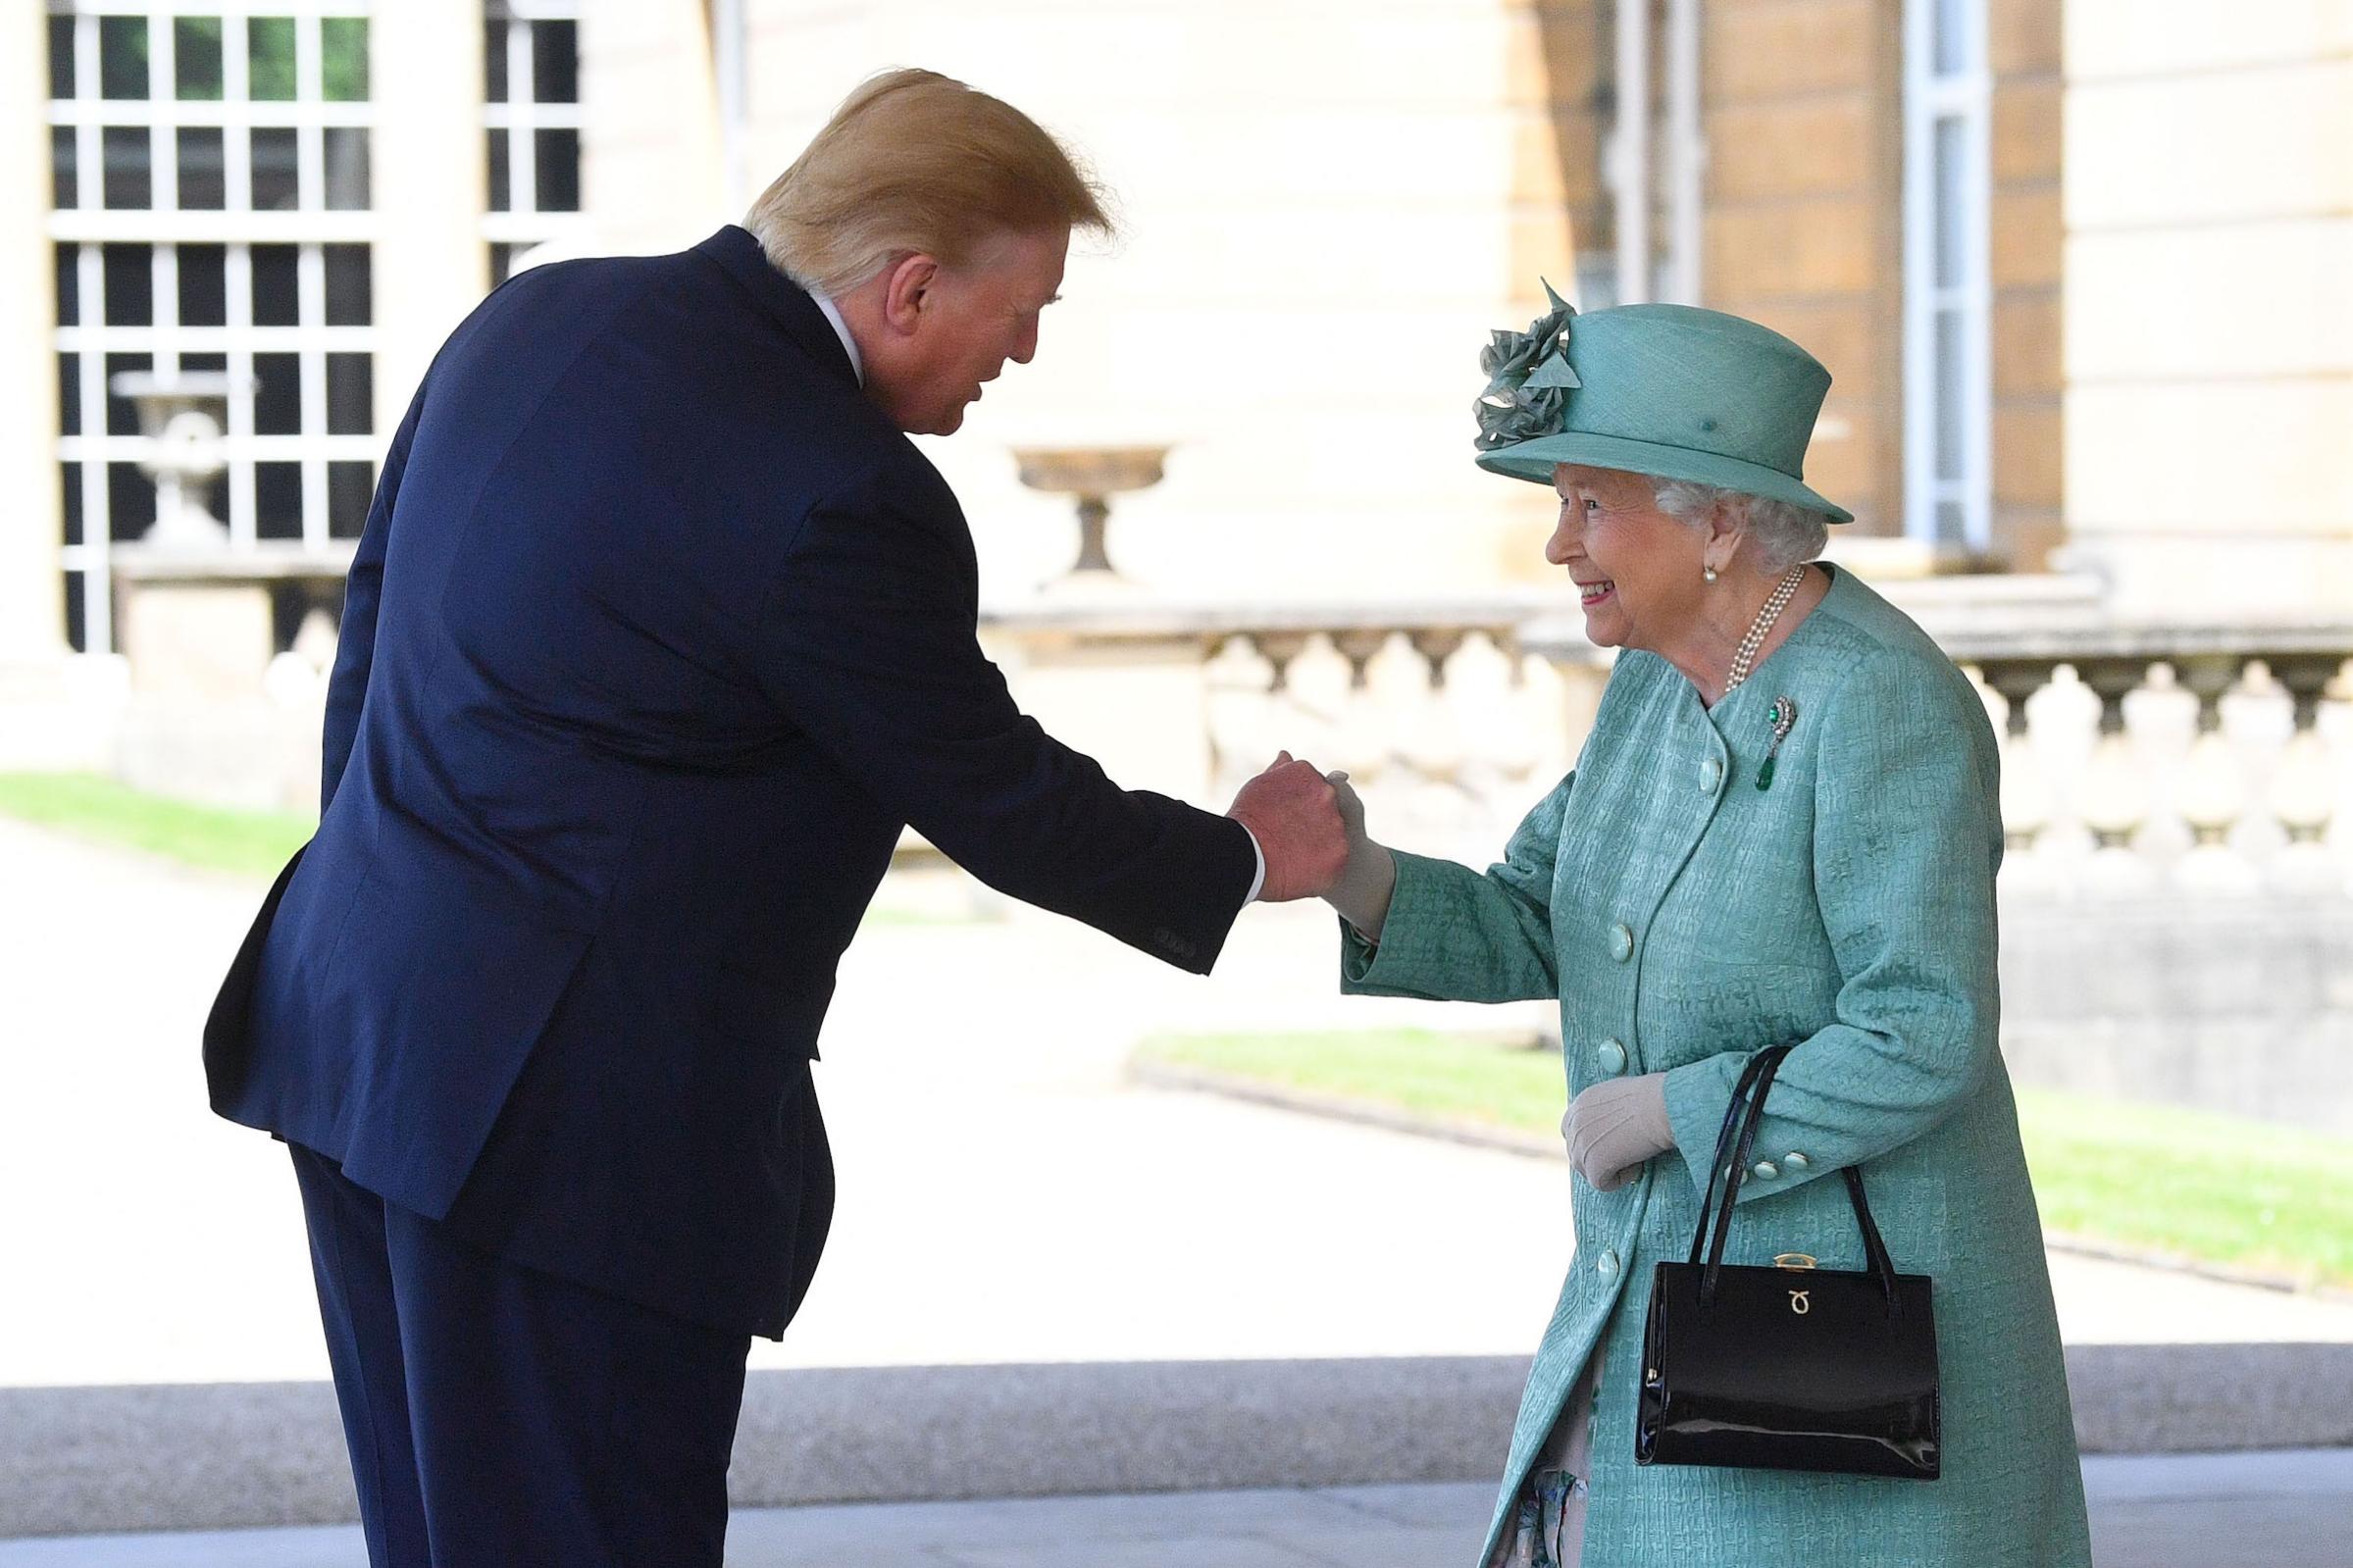 U.S. President Trump's State Visit To UK - Day One